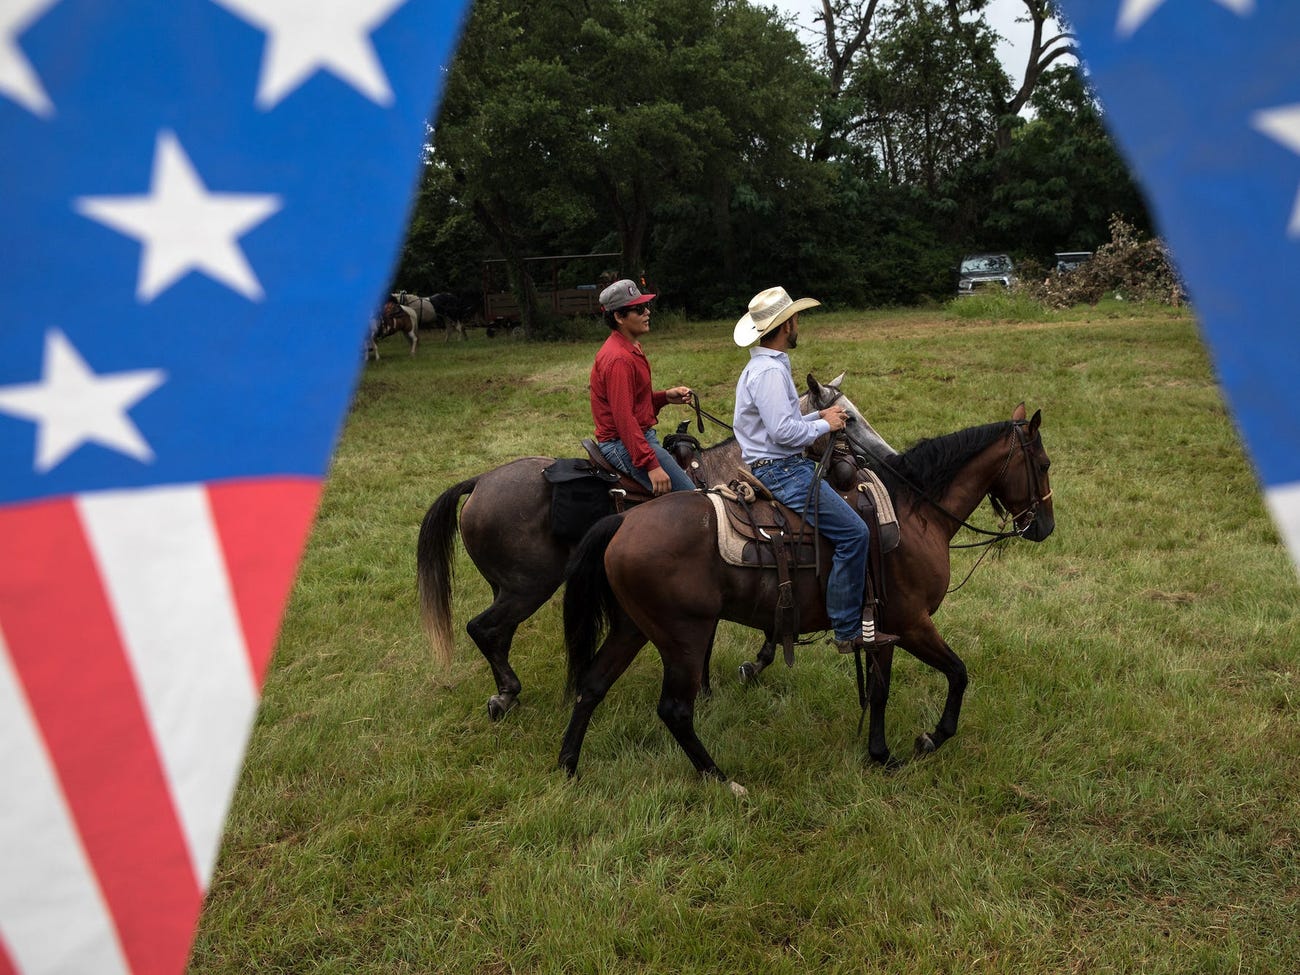 Men on horseback ride through a field after participating in the 168th annual Round Top Fourth of July Parade on July 4, 2018 in Round Top, Texas.